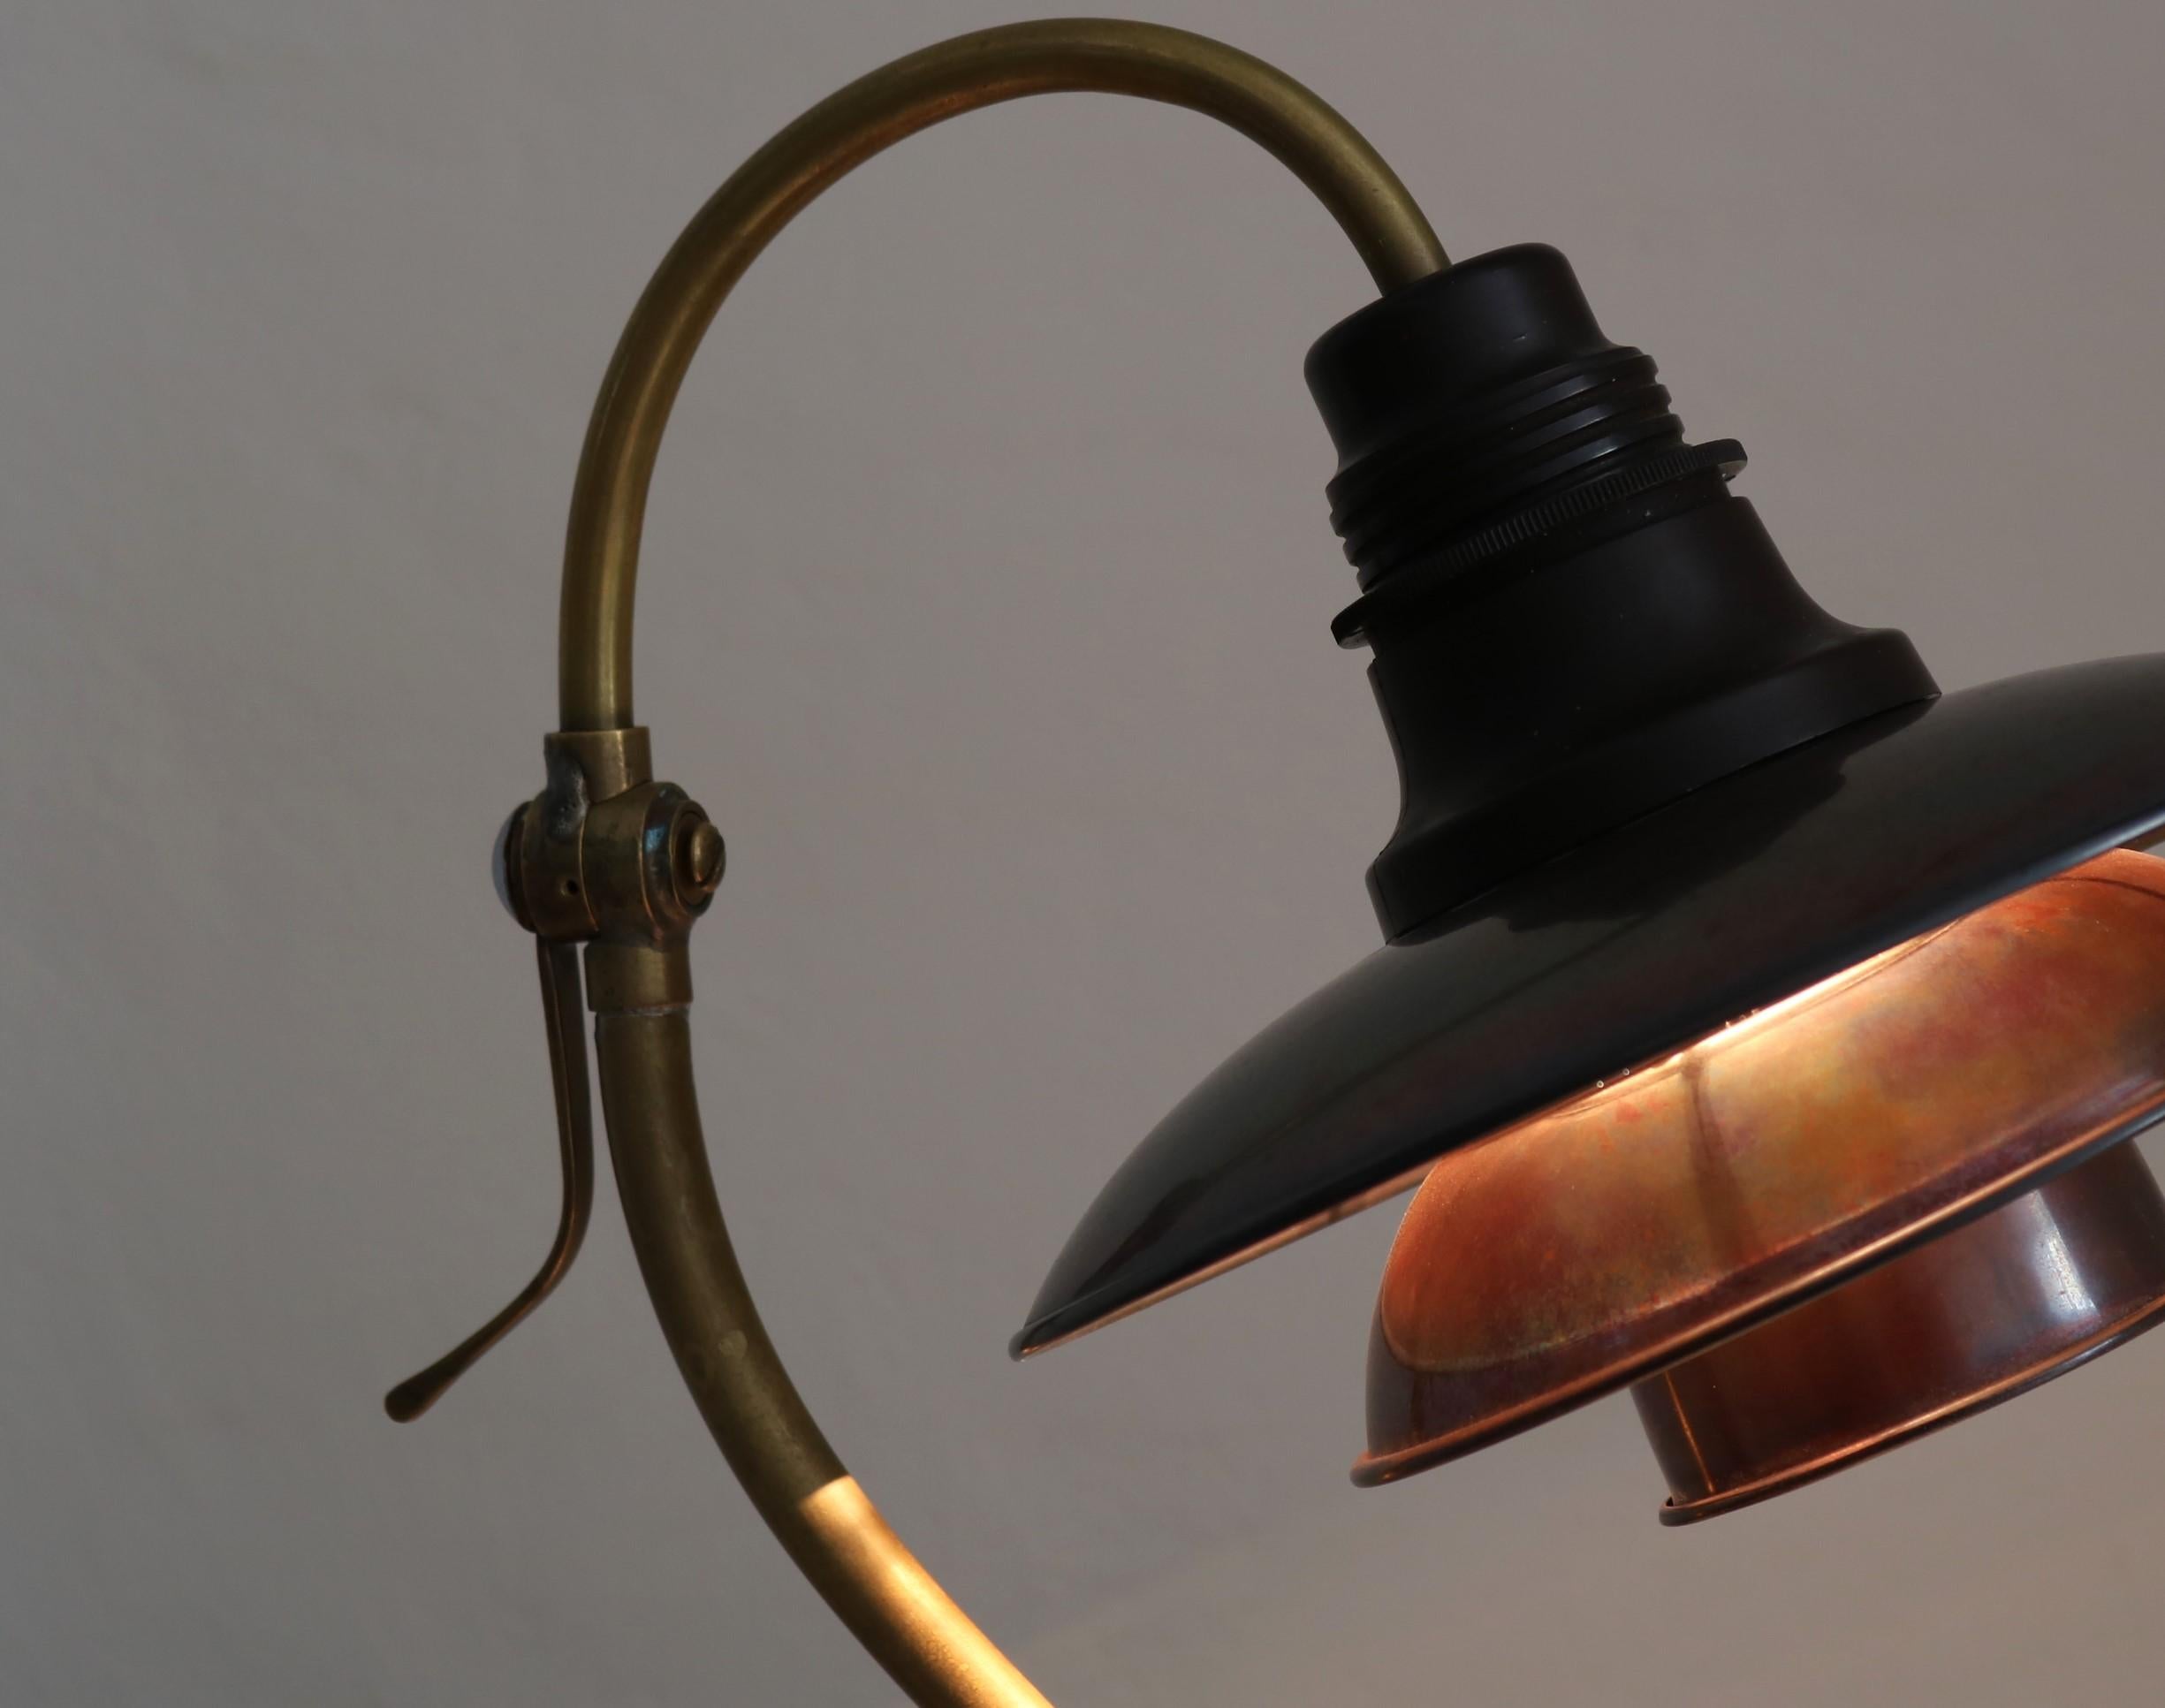 Mid-20th Century Scandinavian Modern PH Desk Lamp in Brass with Copper Shades by Poul Henningsen